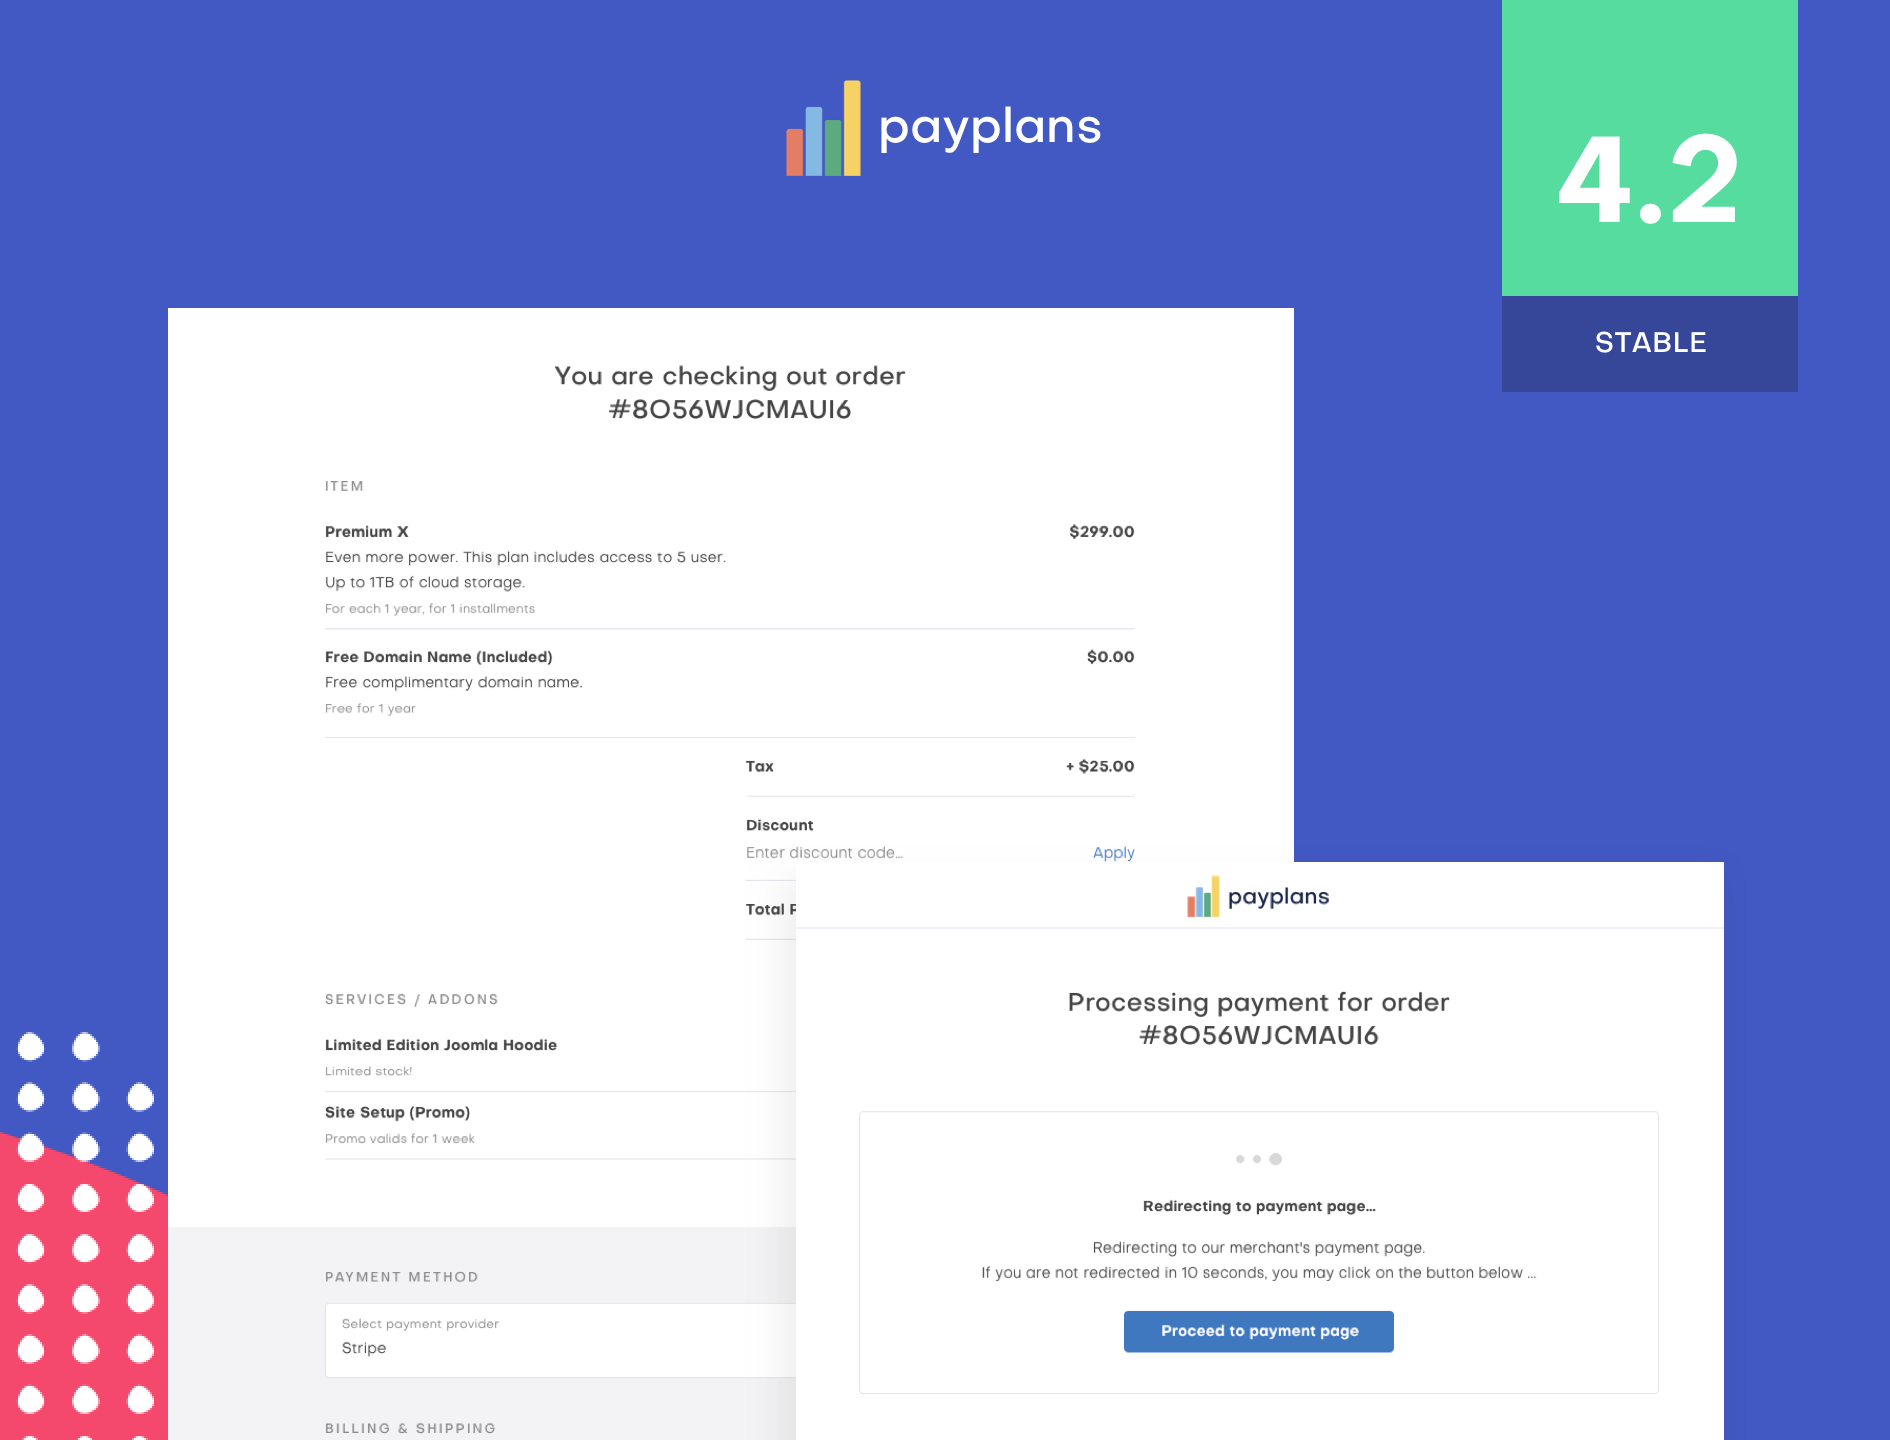 PayPlans 4.2.1 Available Today